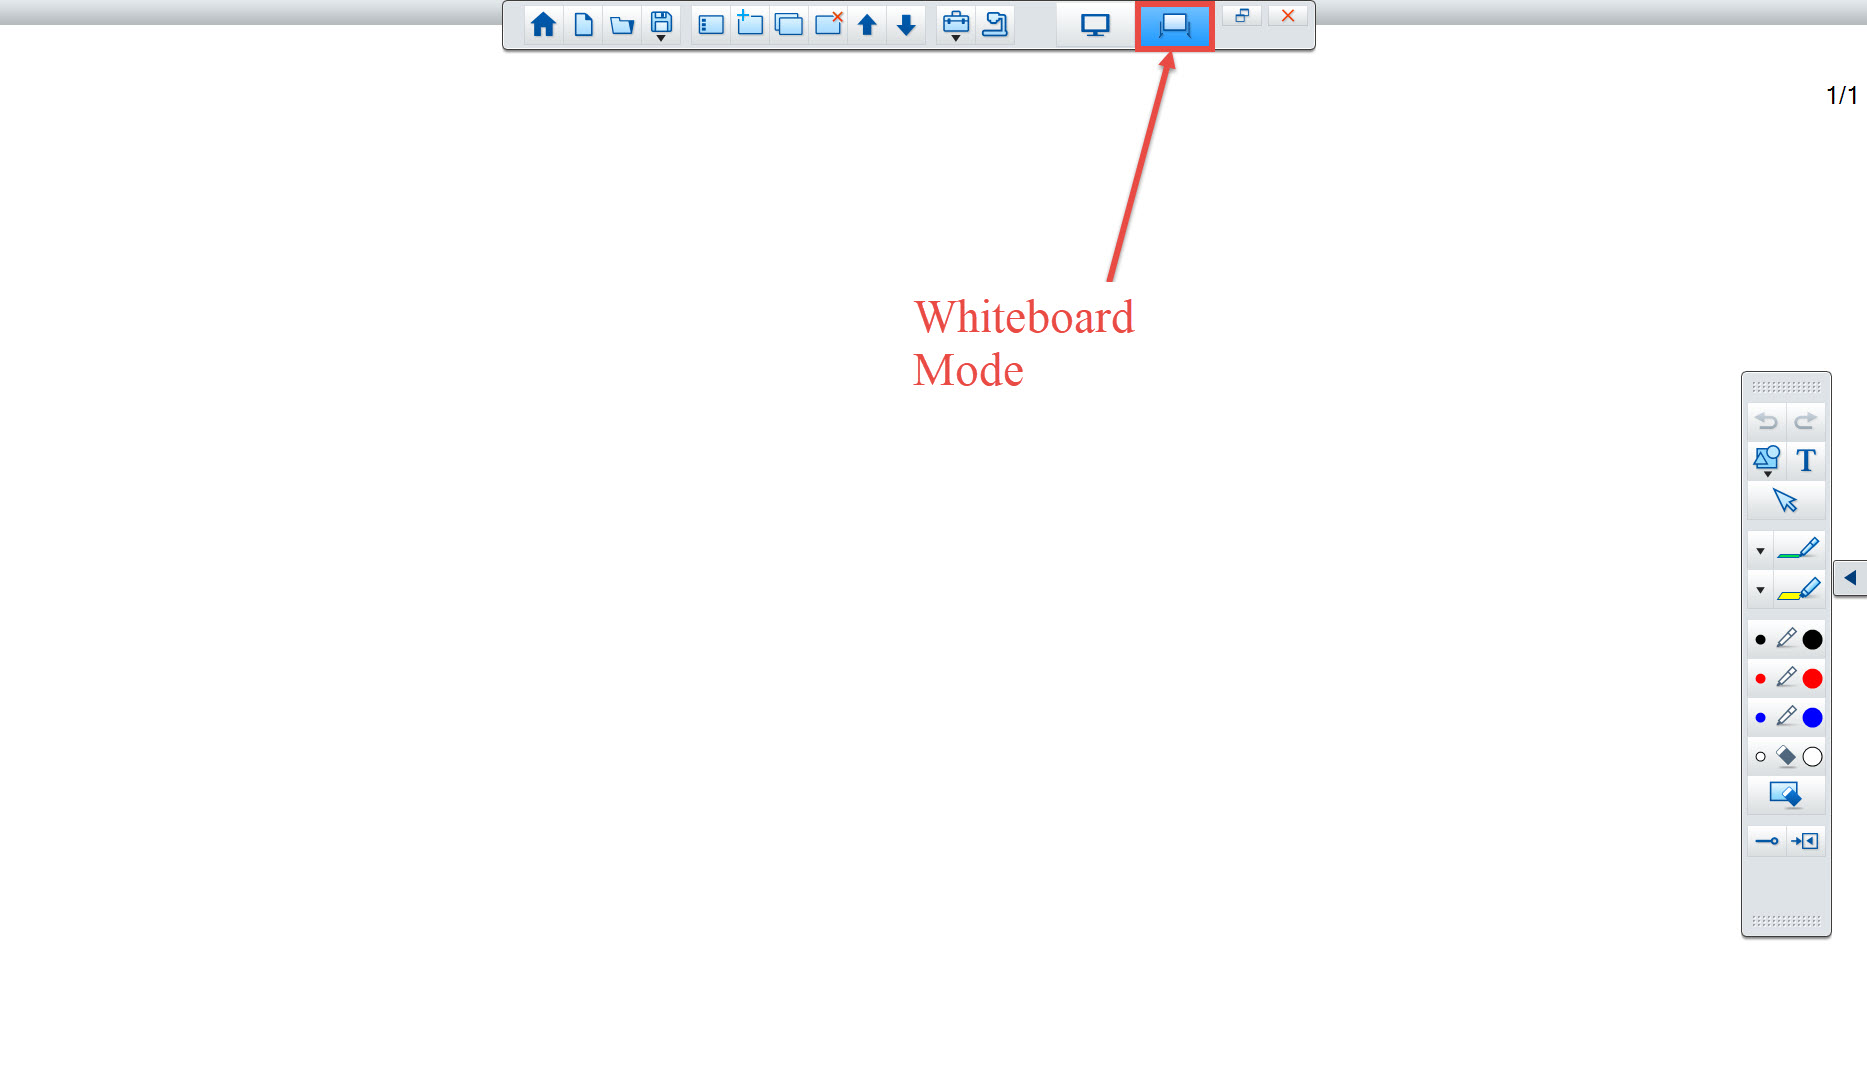 In the whiteboard mode you can write draw or add image